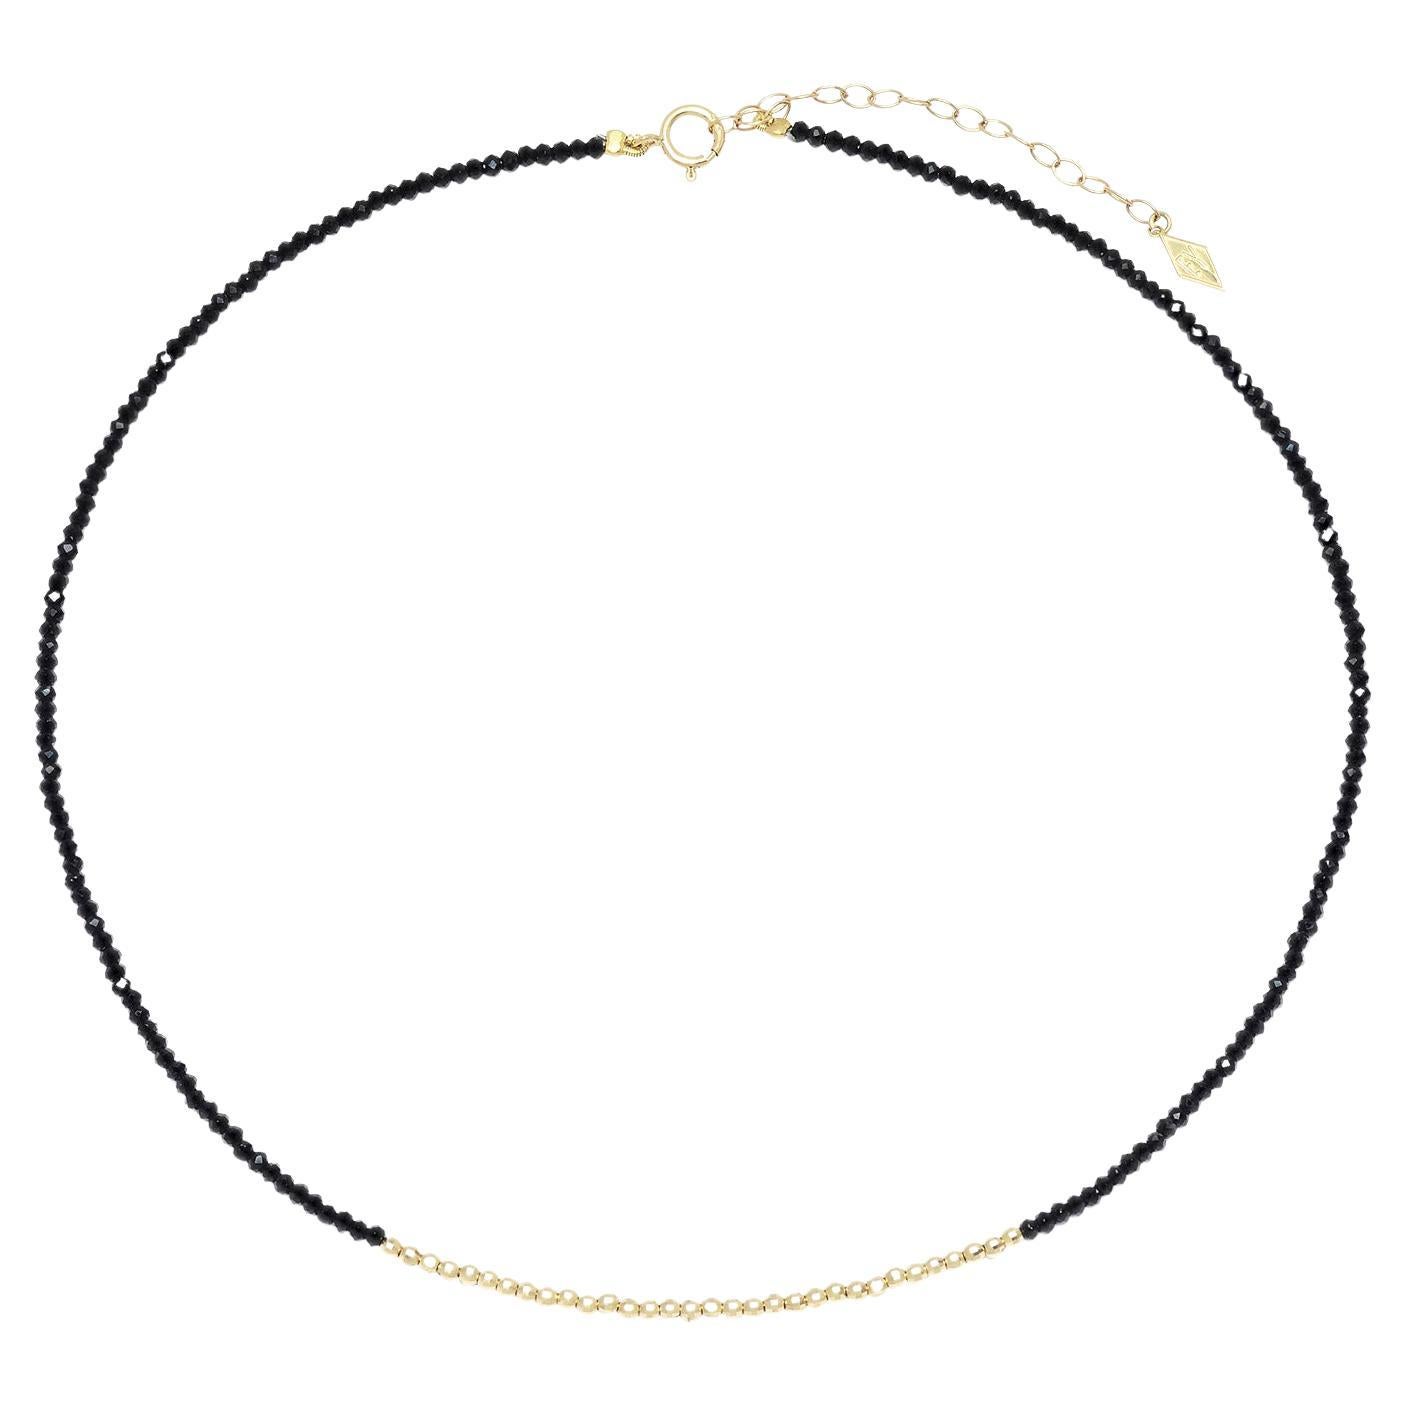 The "Glimmer Choker" with Yellow Gold and Spinel For Sale